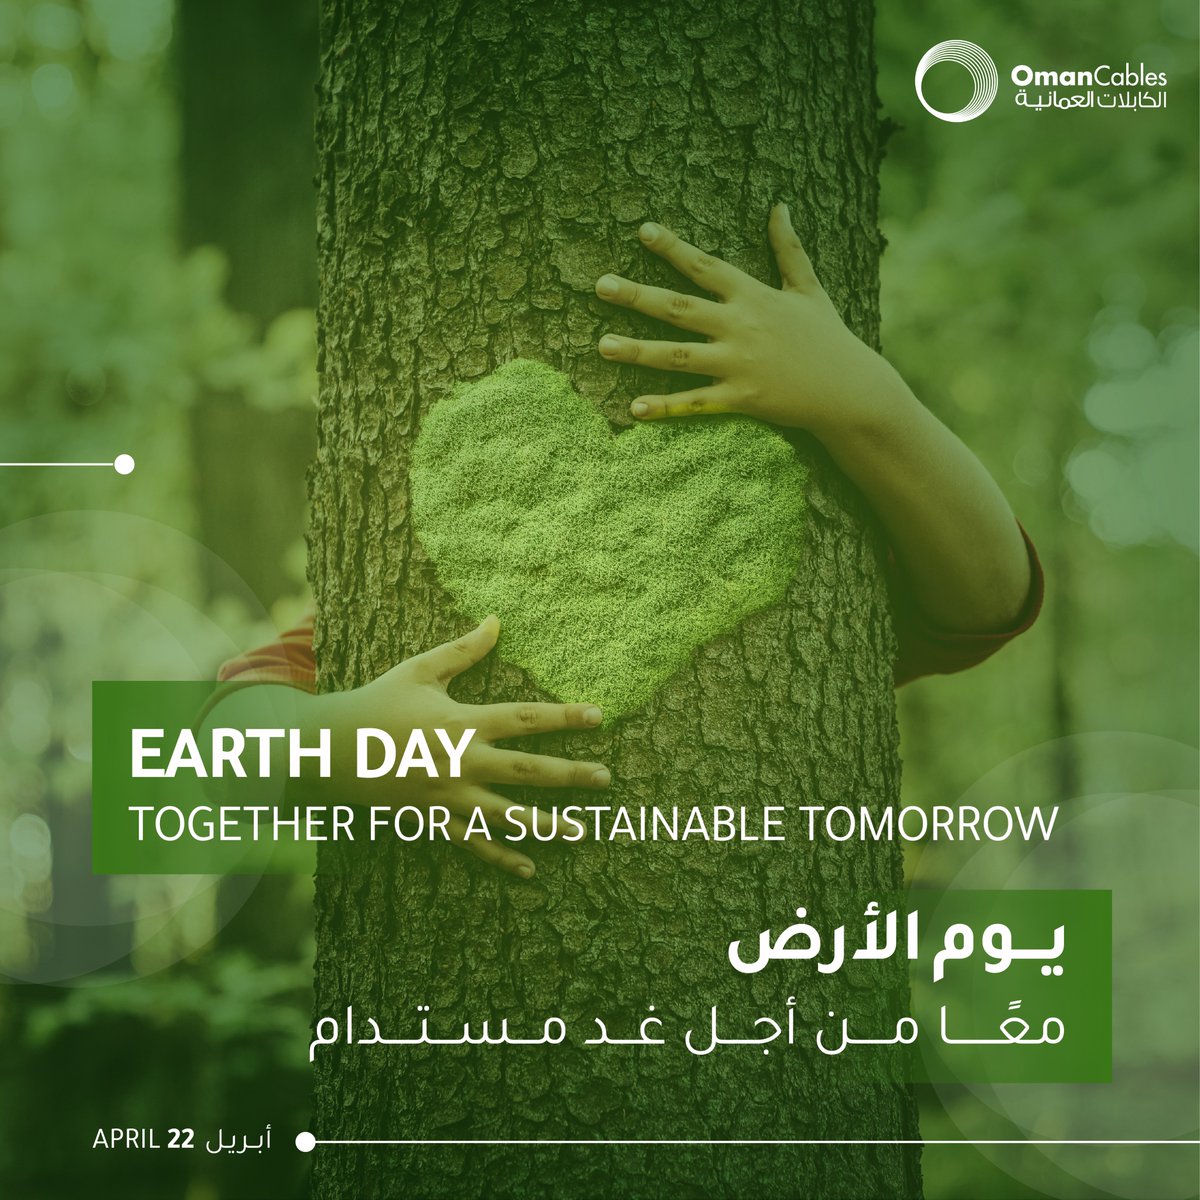 Earth Day is a call to action, urging us to walk gently on our planet and leave a positive footprint for future generations.

Let's make everyday Earth Day. Together, we can build a brighter, more sustainable future.

#Sustainability #Earthday #OCI #ProtectOurHome